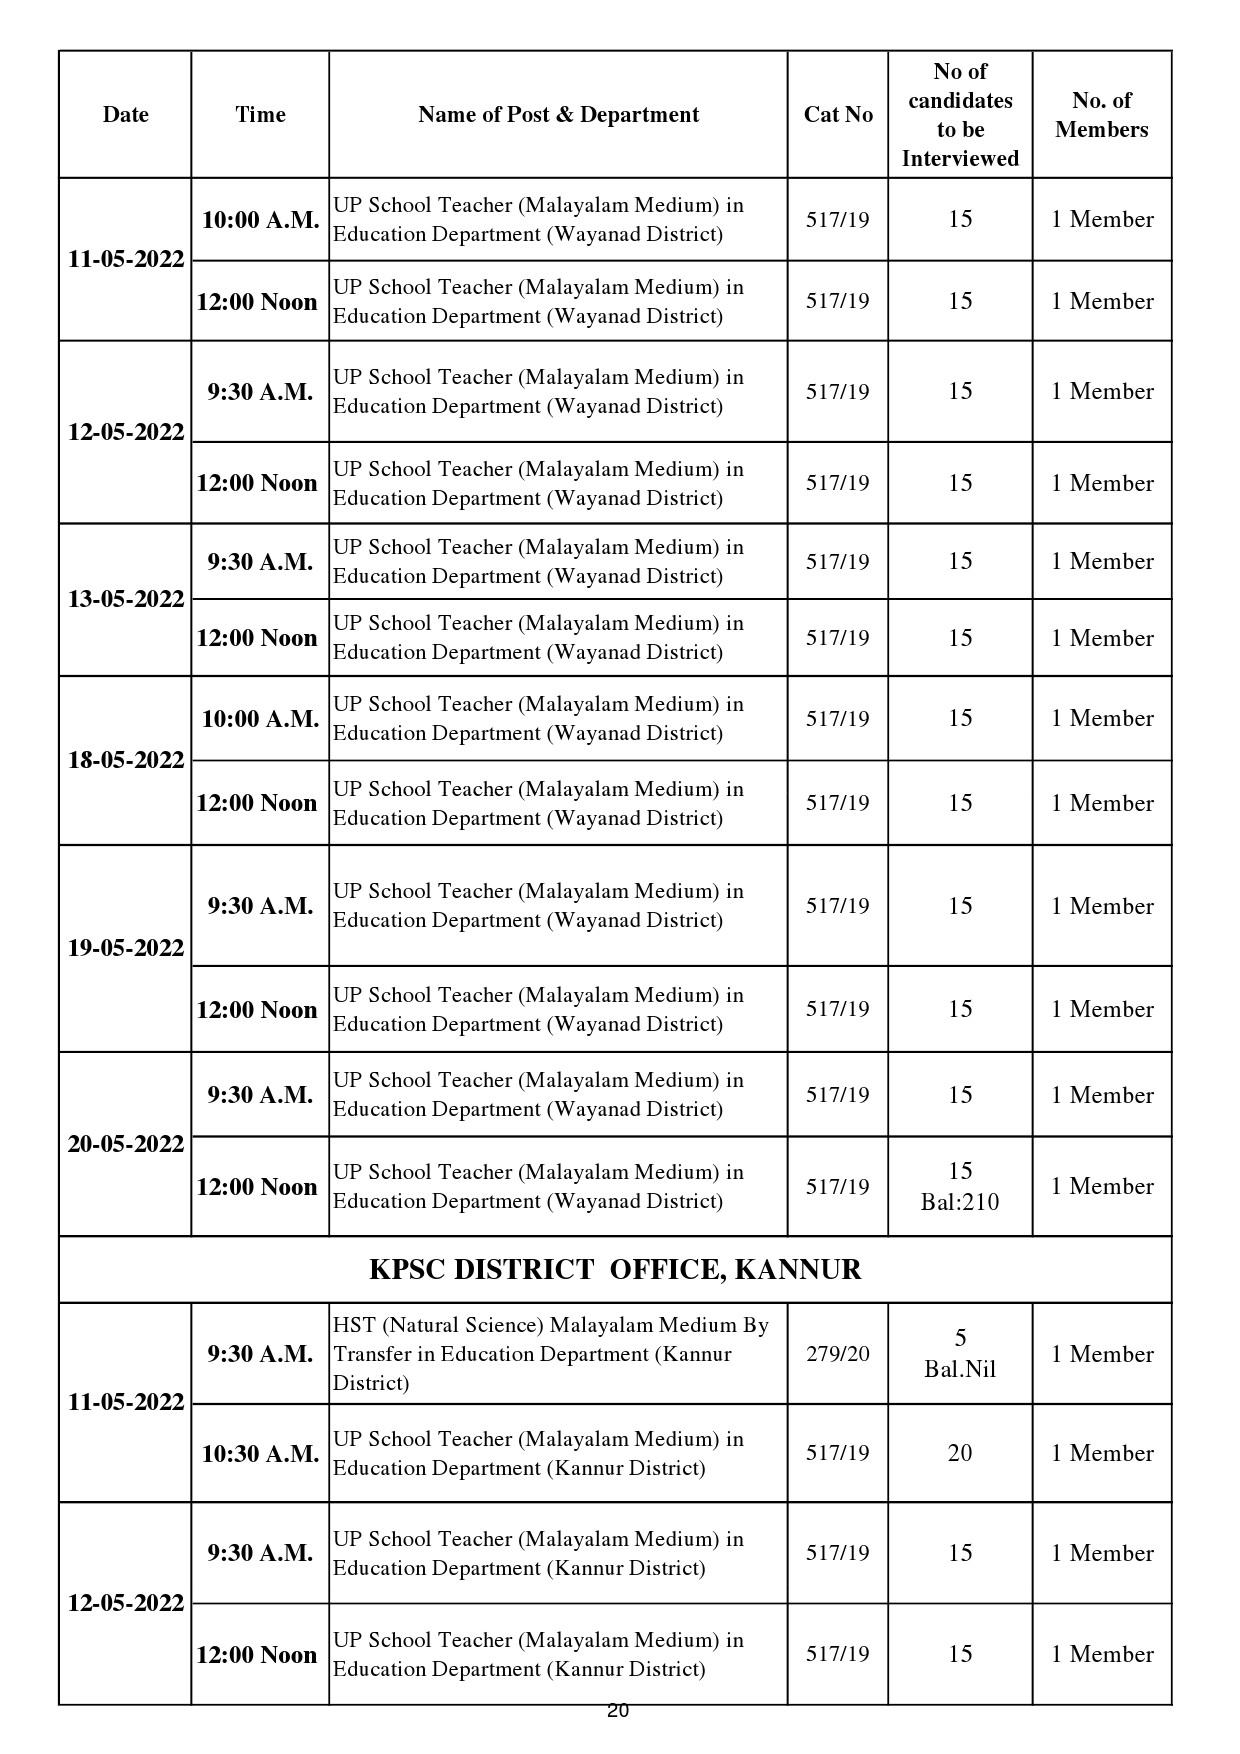 KPSC INTERVIEW PROGRAMME FOR THE MONTH OF MAY 2022 - Notification Image 20